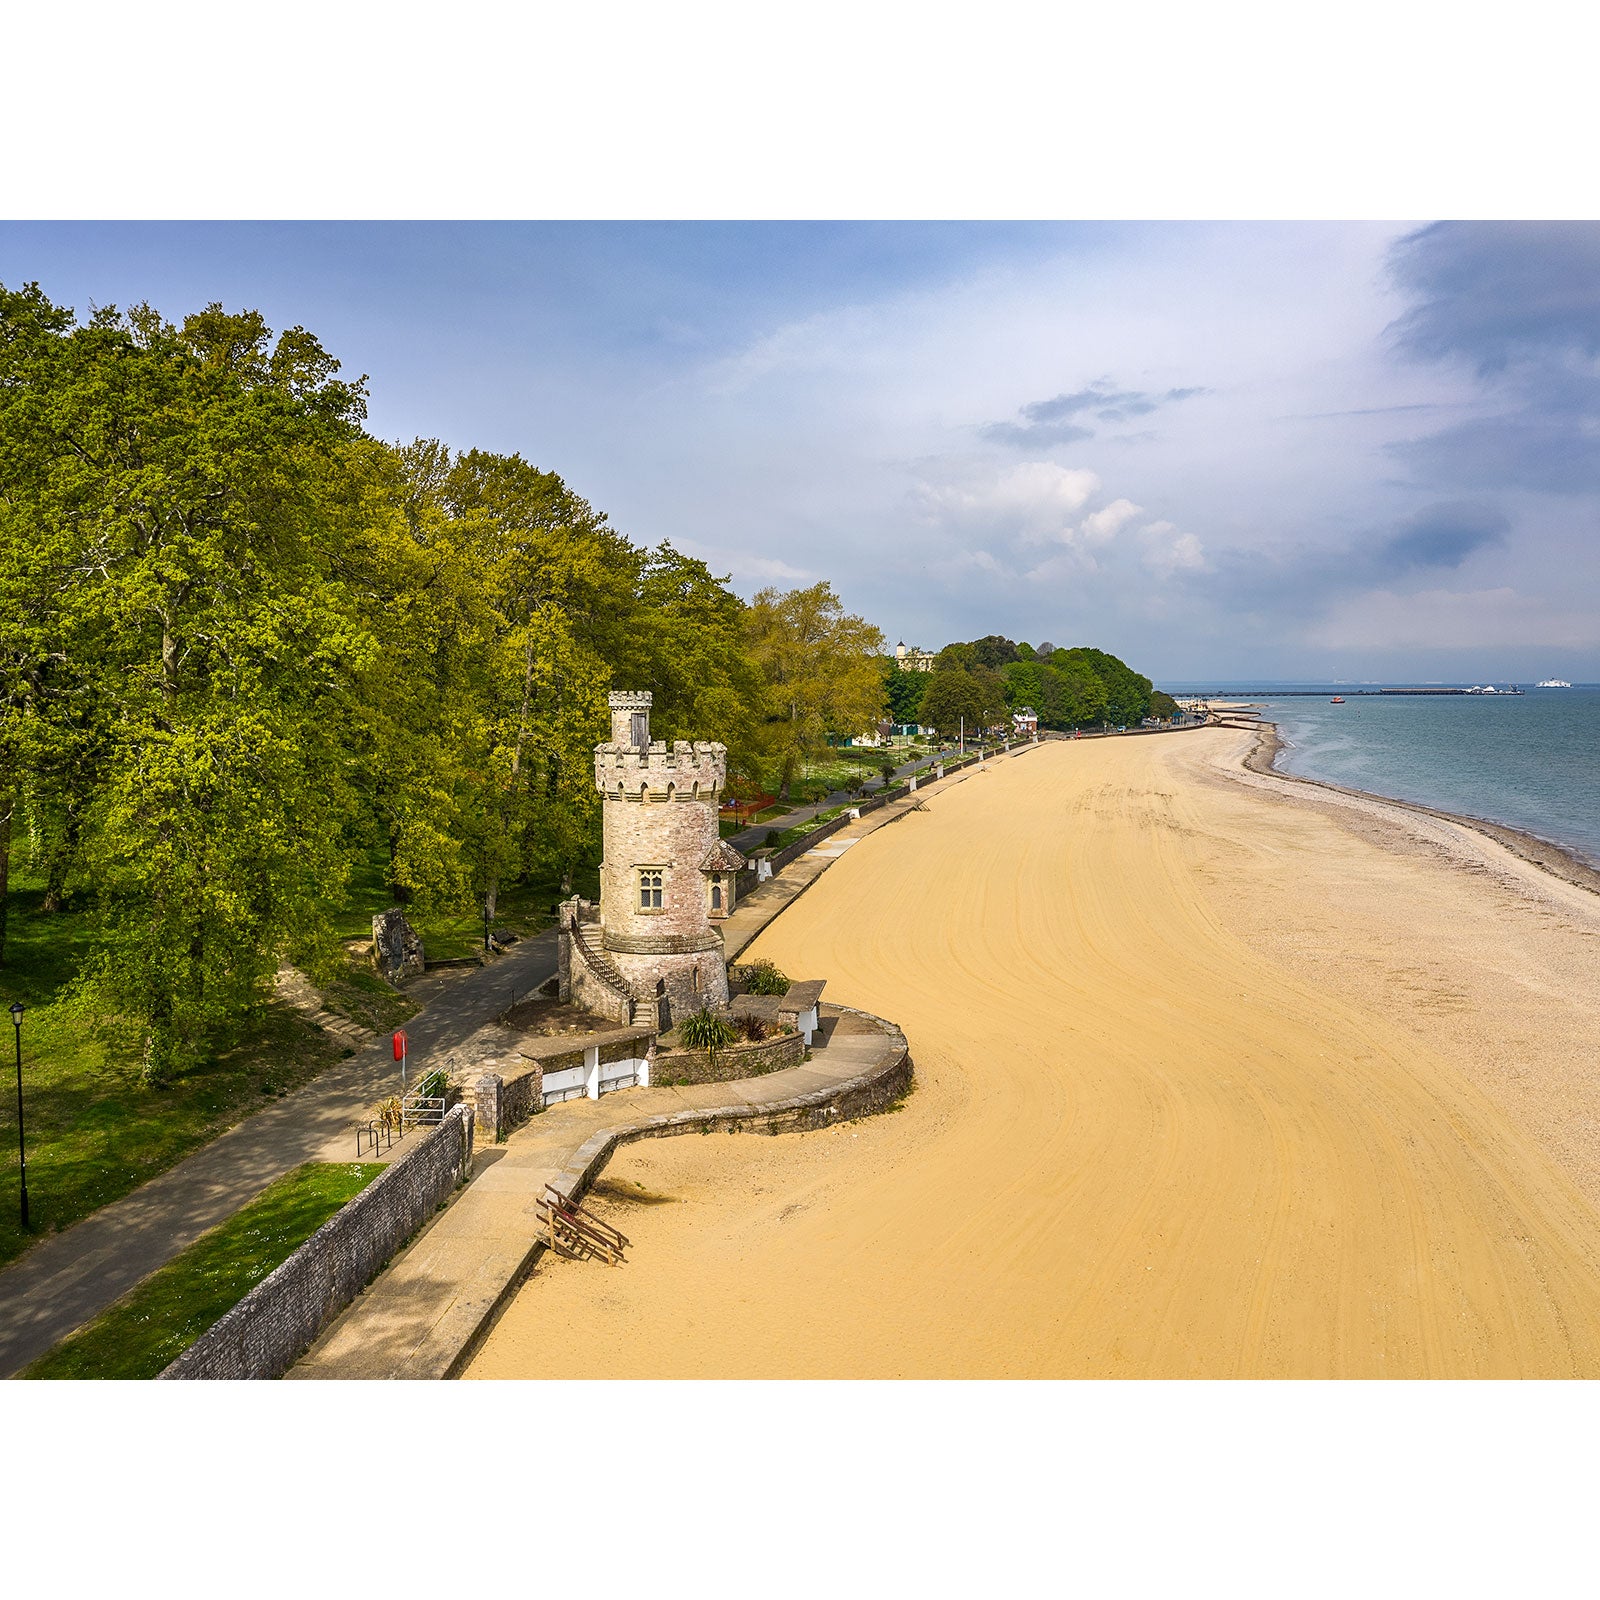 A serene beachside vista featuring the sandy shore, the Appley Tower, and a tree-lined promenade under a partly cloudy sky captured by Available Light Photography.